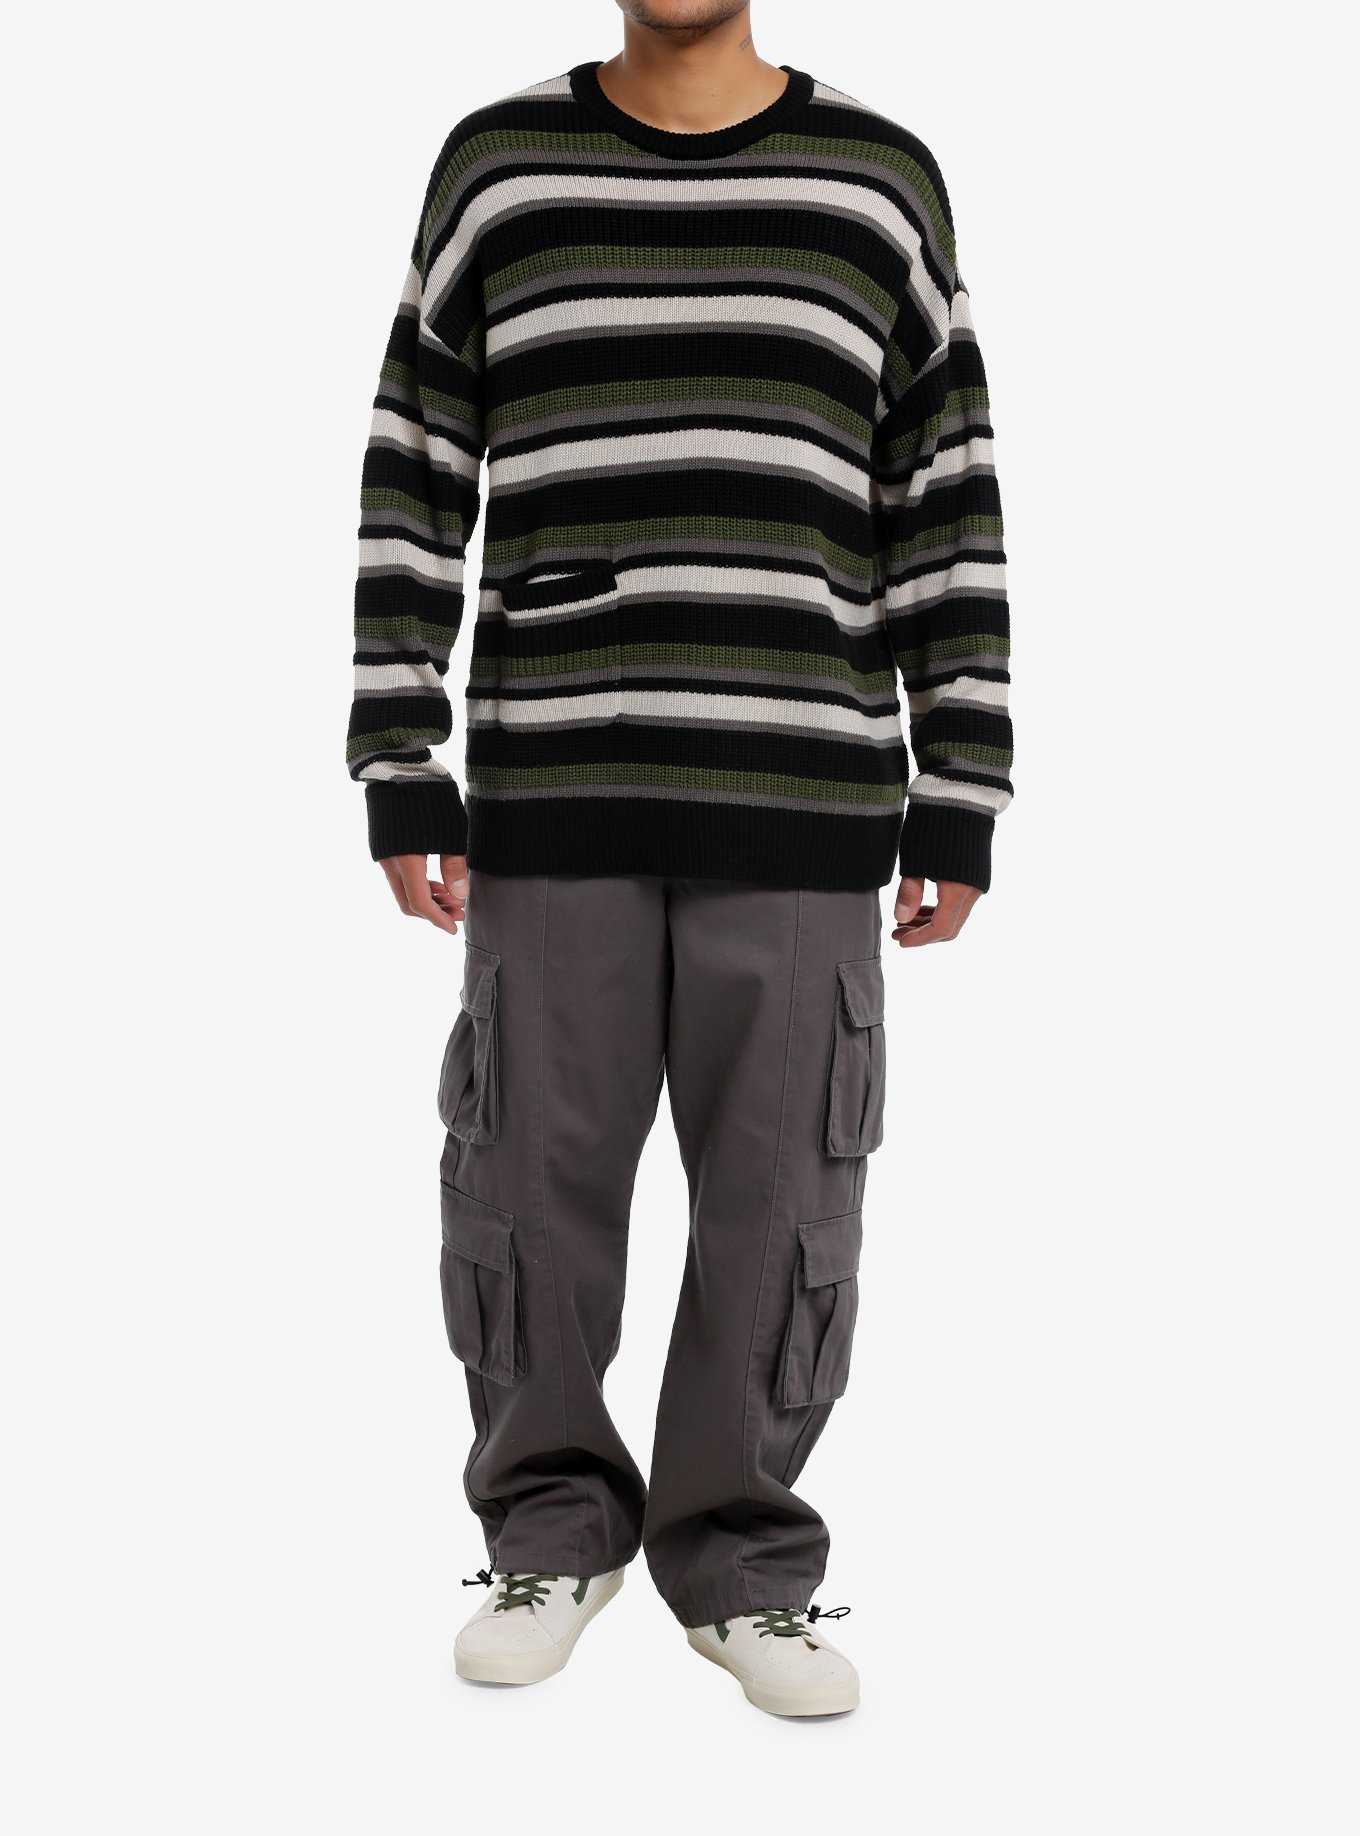 Thorn & Fable Green Black & White Stripe Knit Sweater, , hi-res